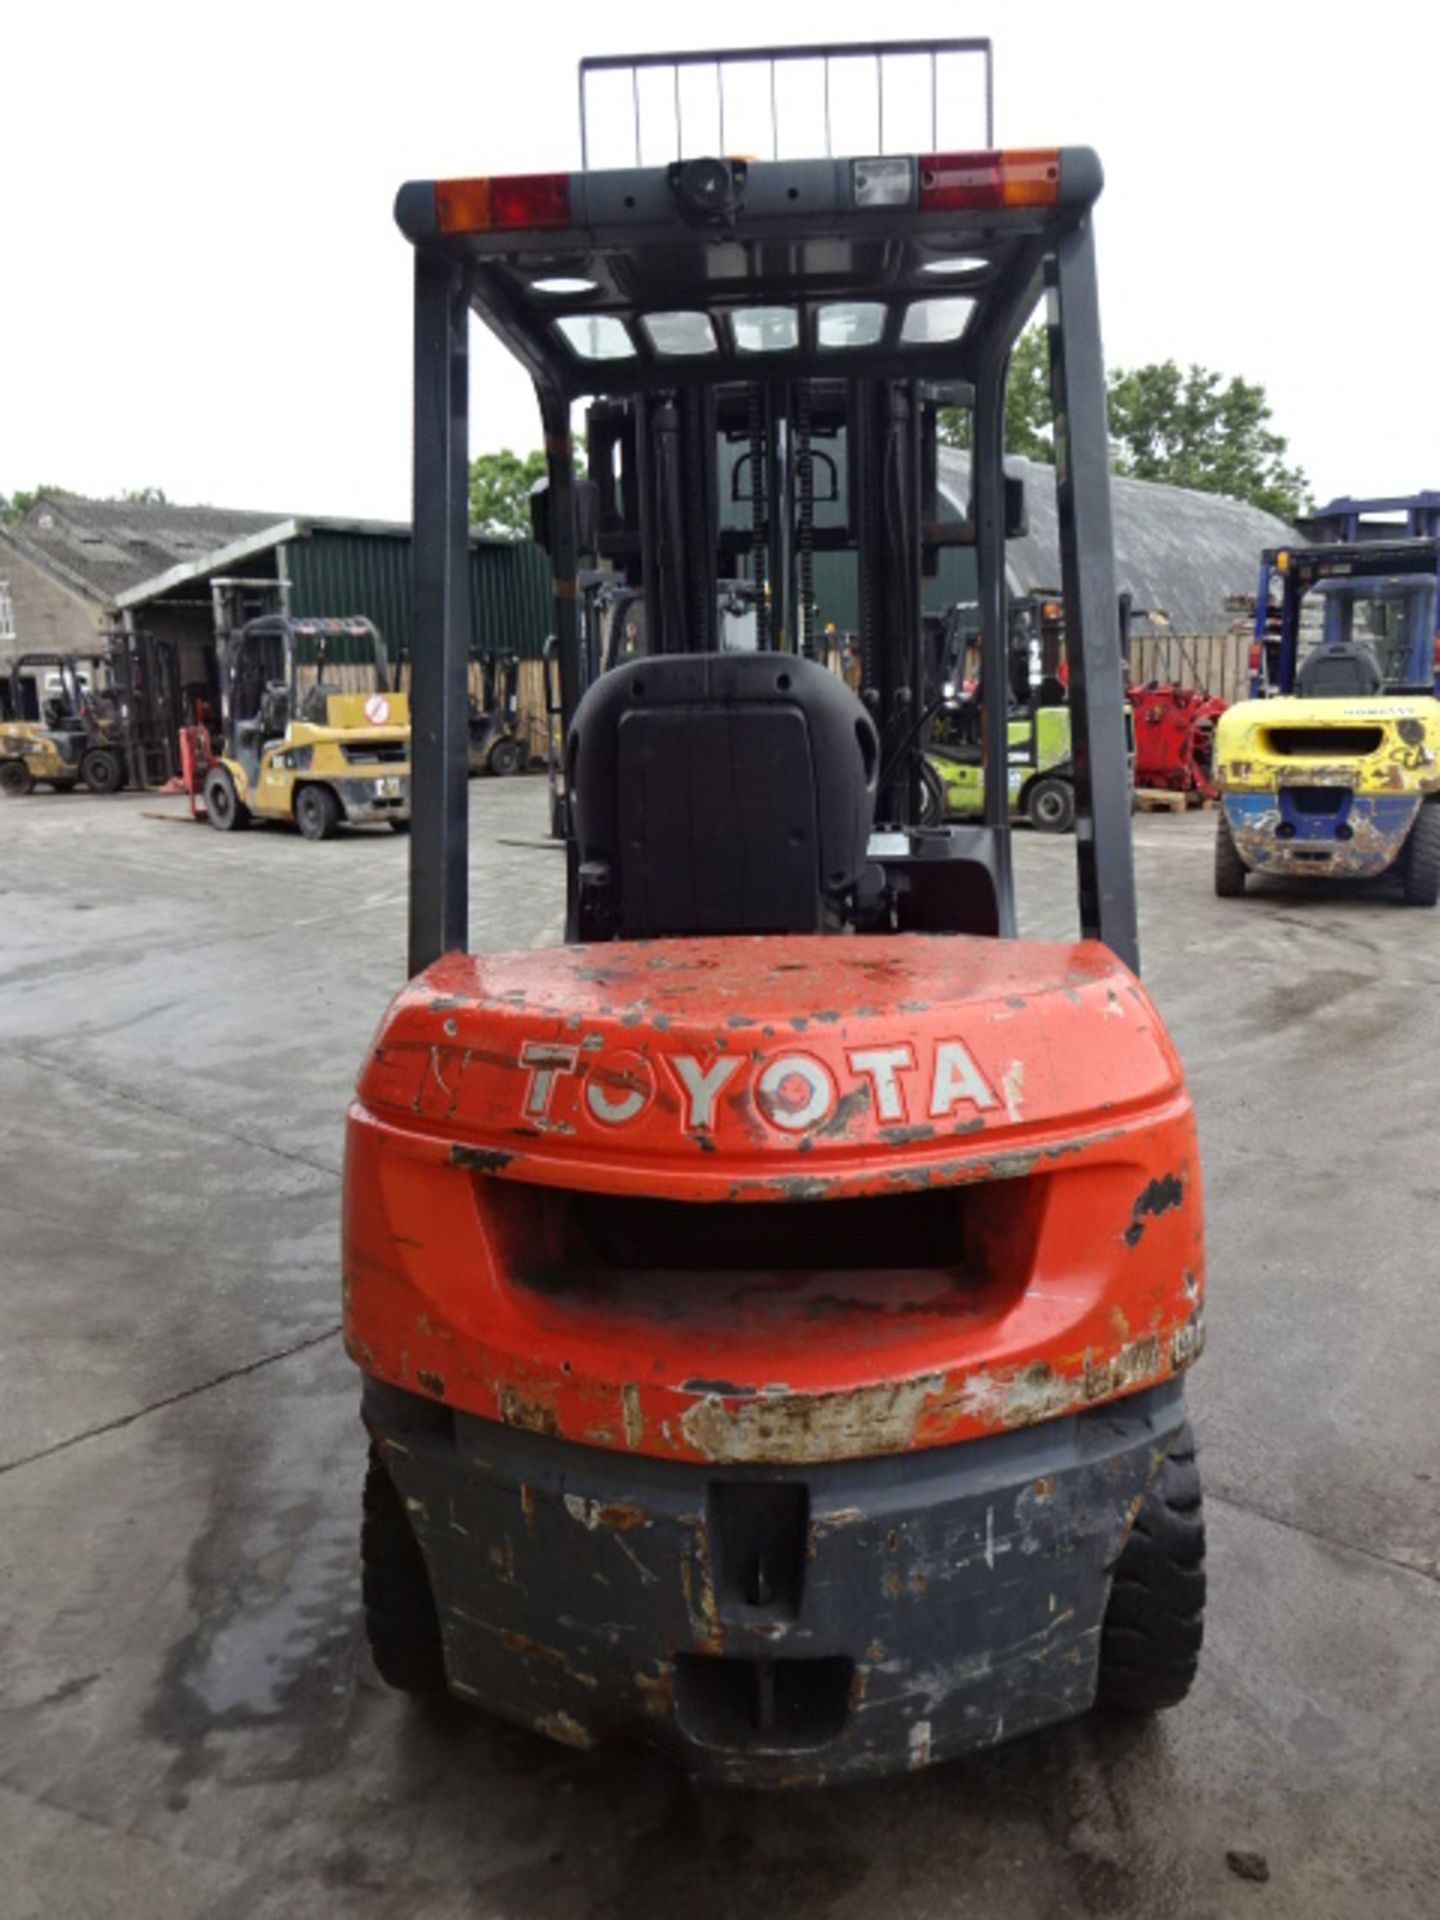 2006 TOYOTA 7-FDF25 2.5t diesel driven forklift truck S/n: E11274 with triplex free-lift mast & - Image 8 of 8